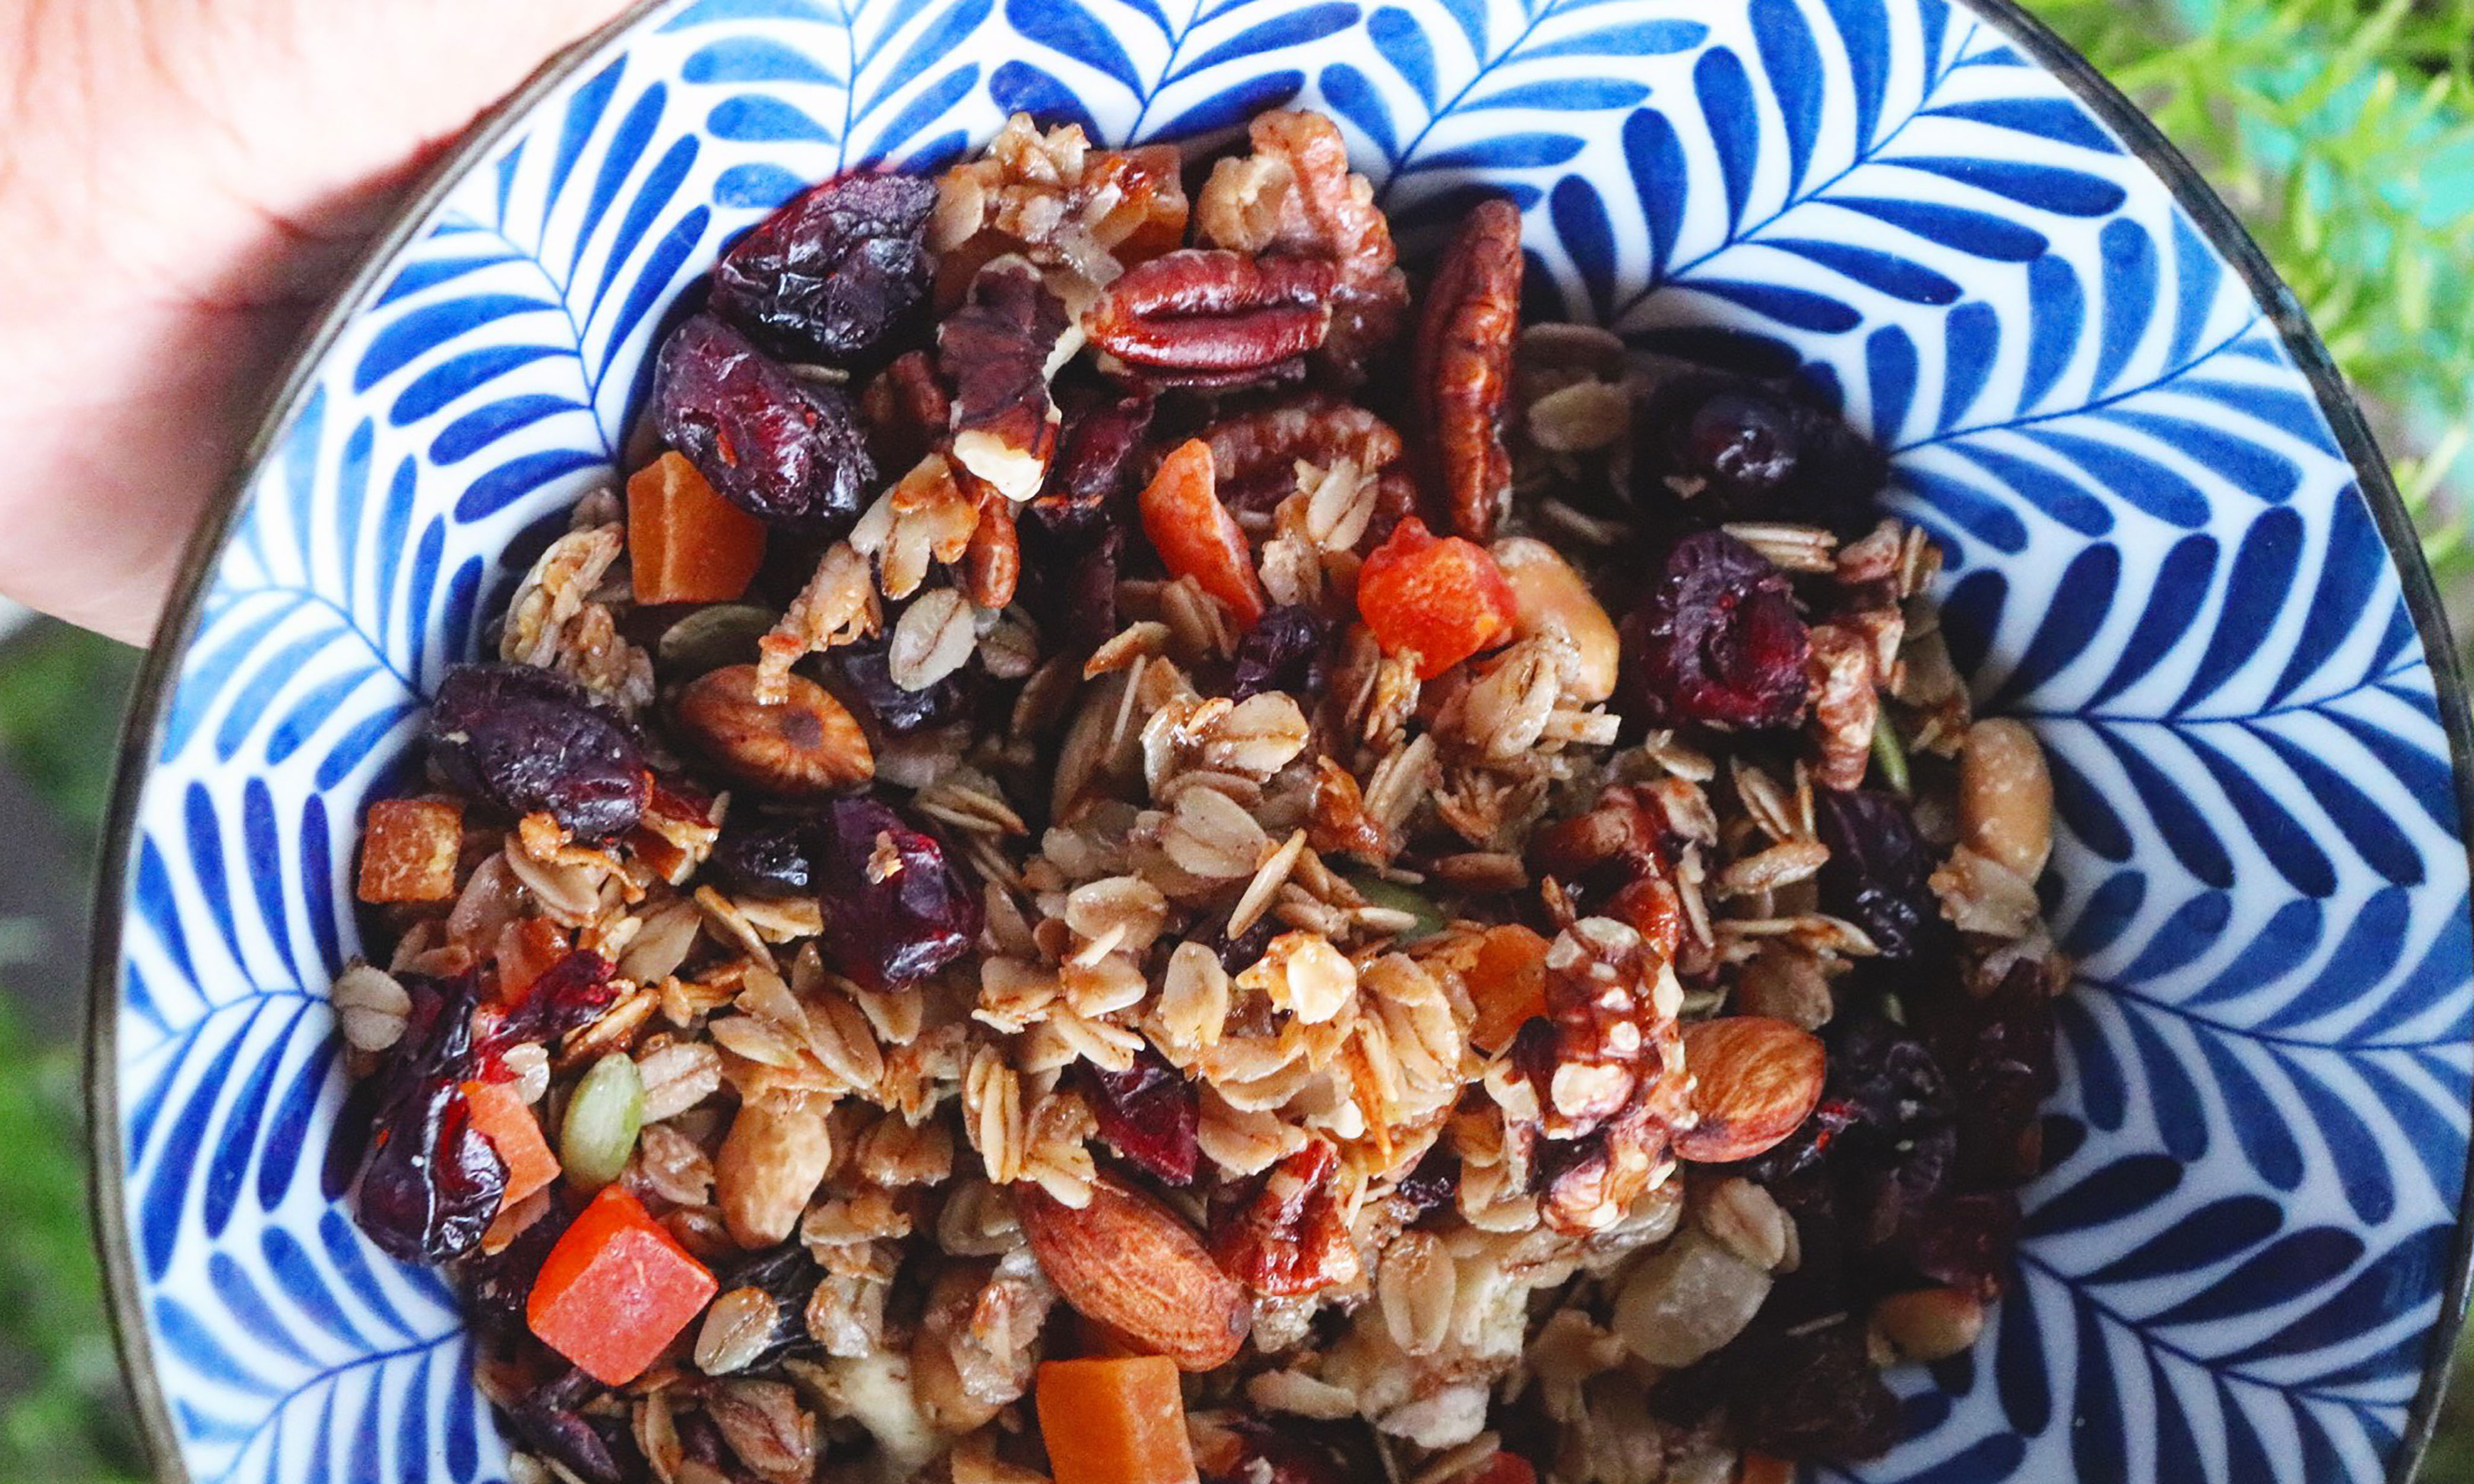 Bake Oats And Nuts For Yummy, Gourmet Granola